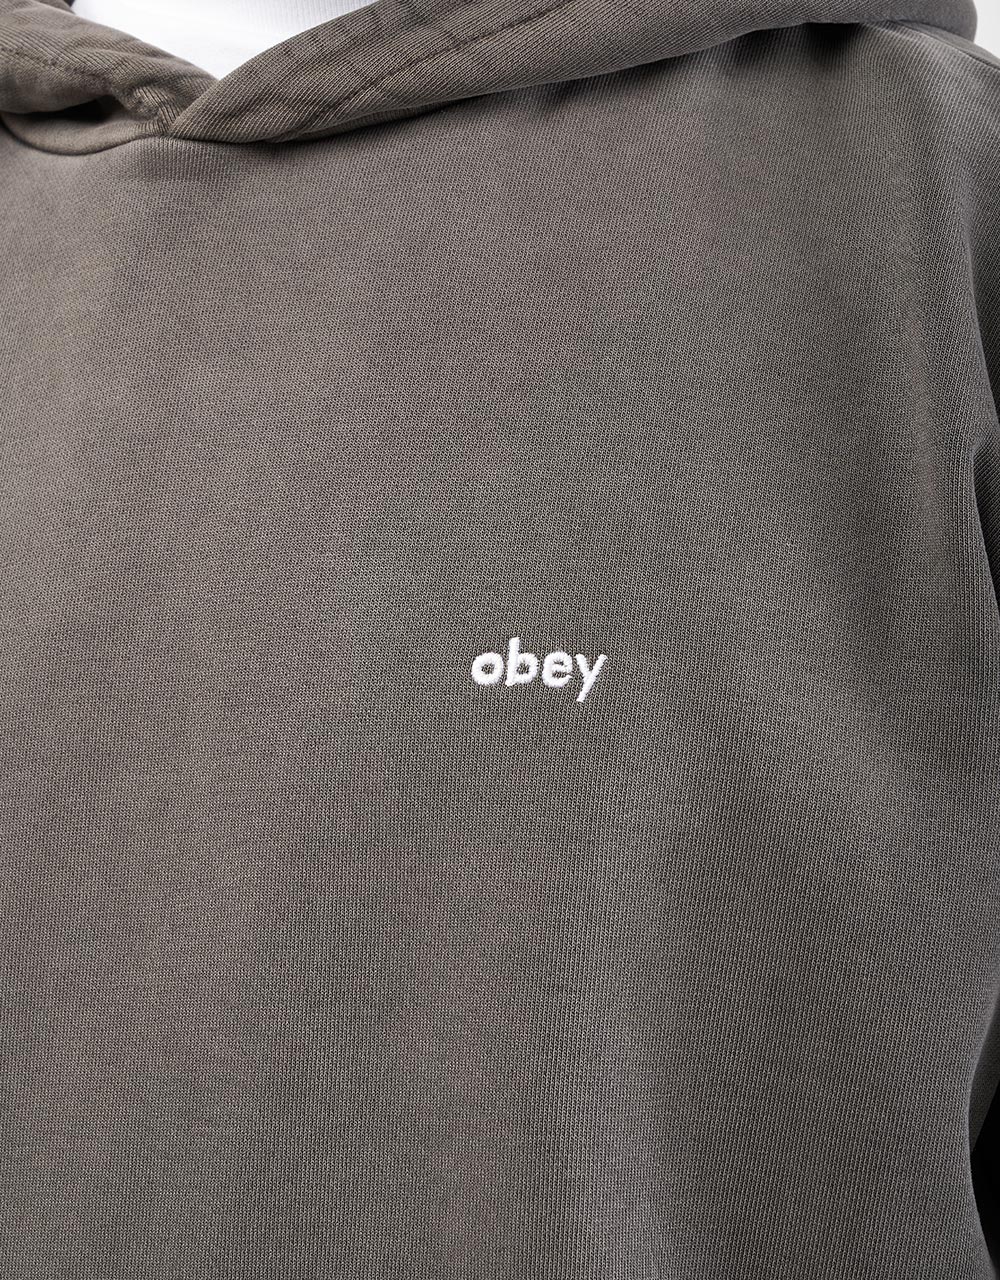 Obey Lowercase Pigment Pullover Hoodie - Pigment Digitial Black